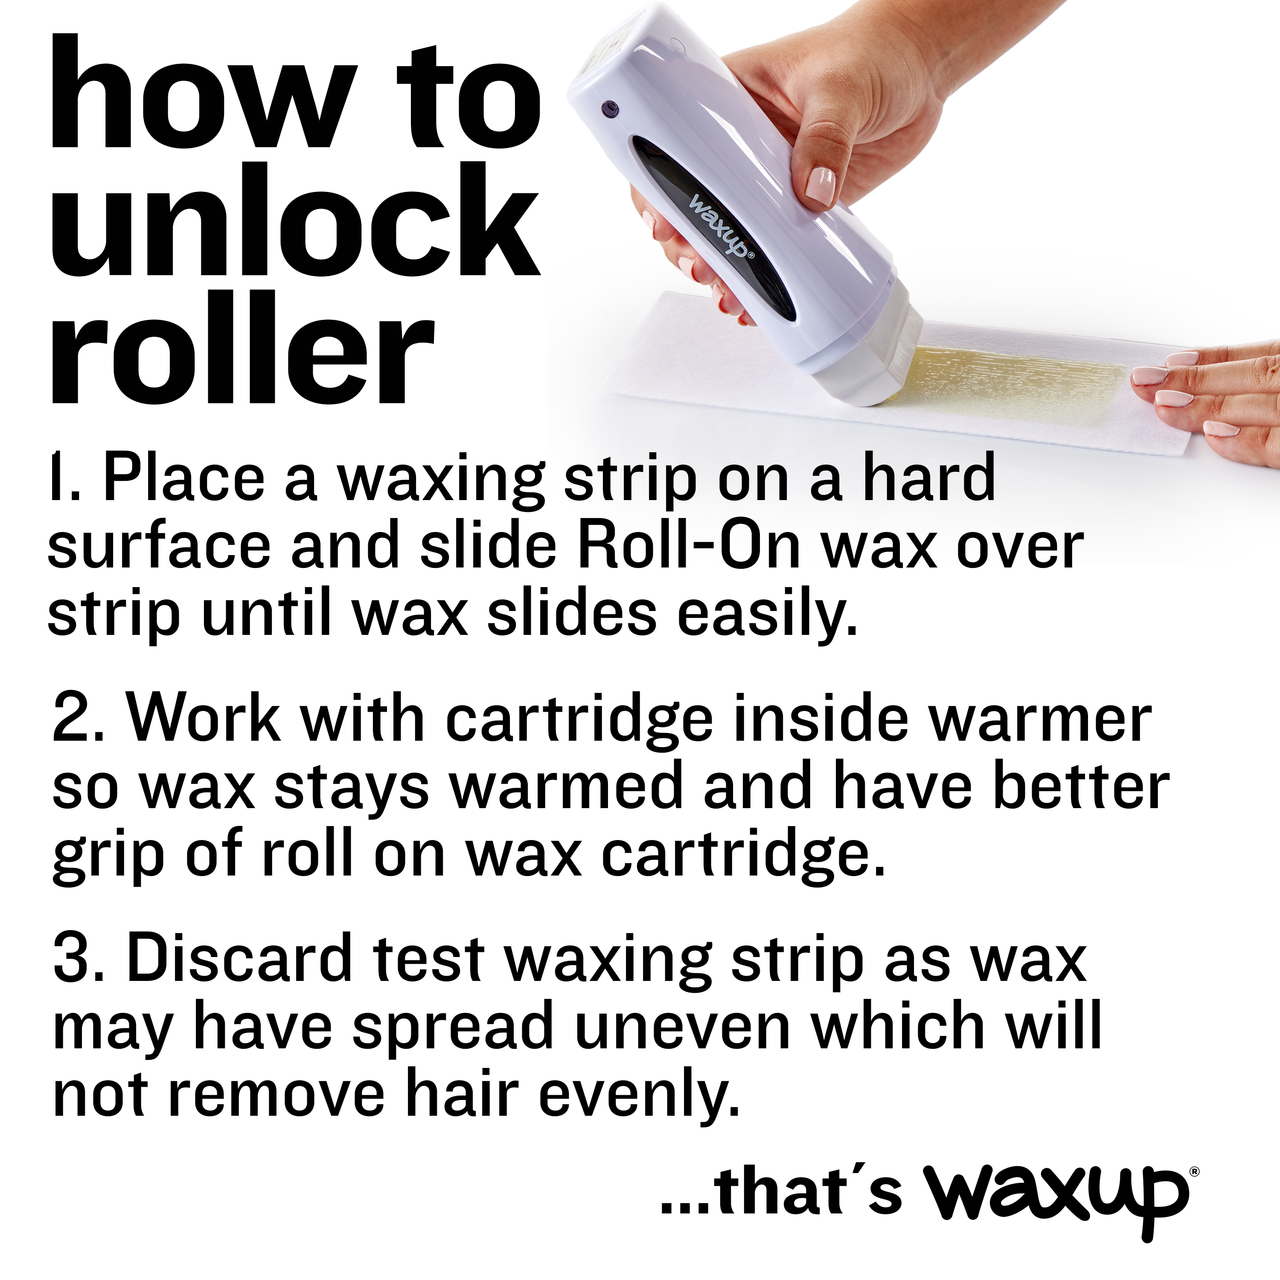 Gold Roller Waxing Kit Refill Small - thatswaxup -  - Roller Waxing Kit - waxup hair removal wax body waxing kit women and men professional waxing supplies